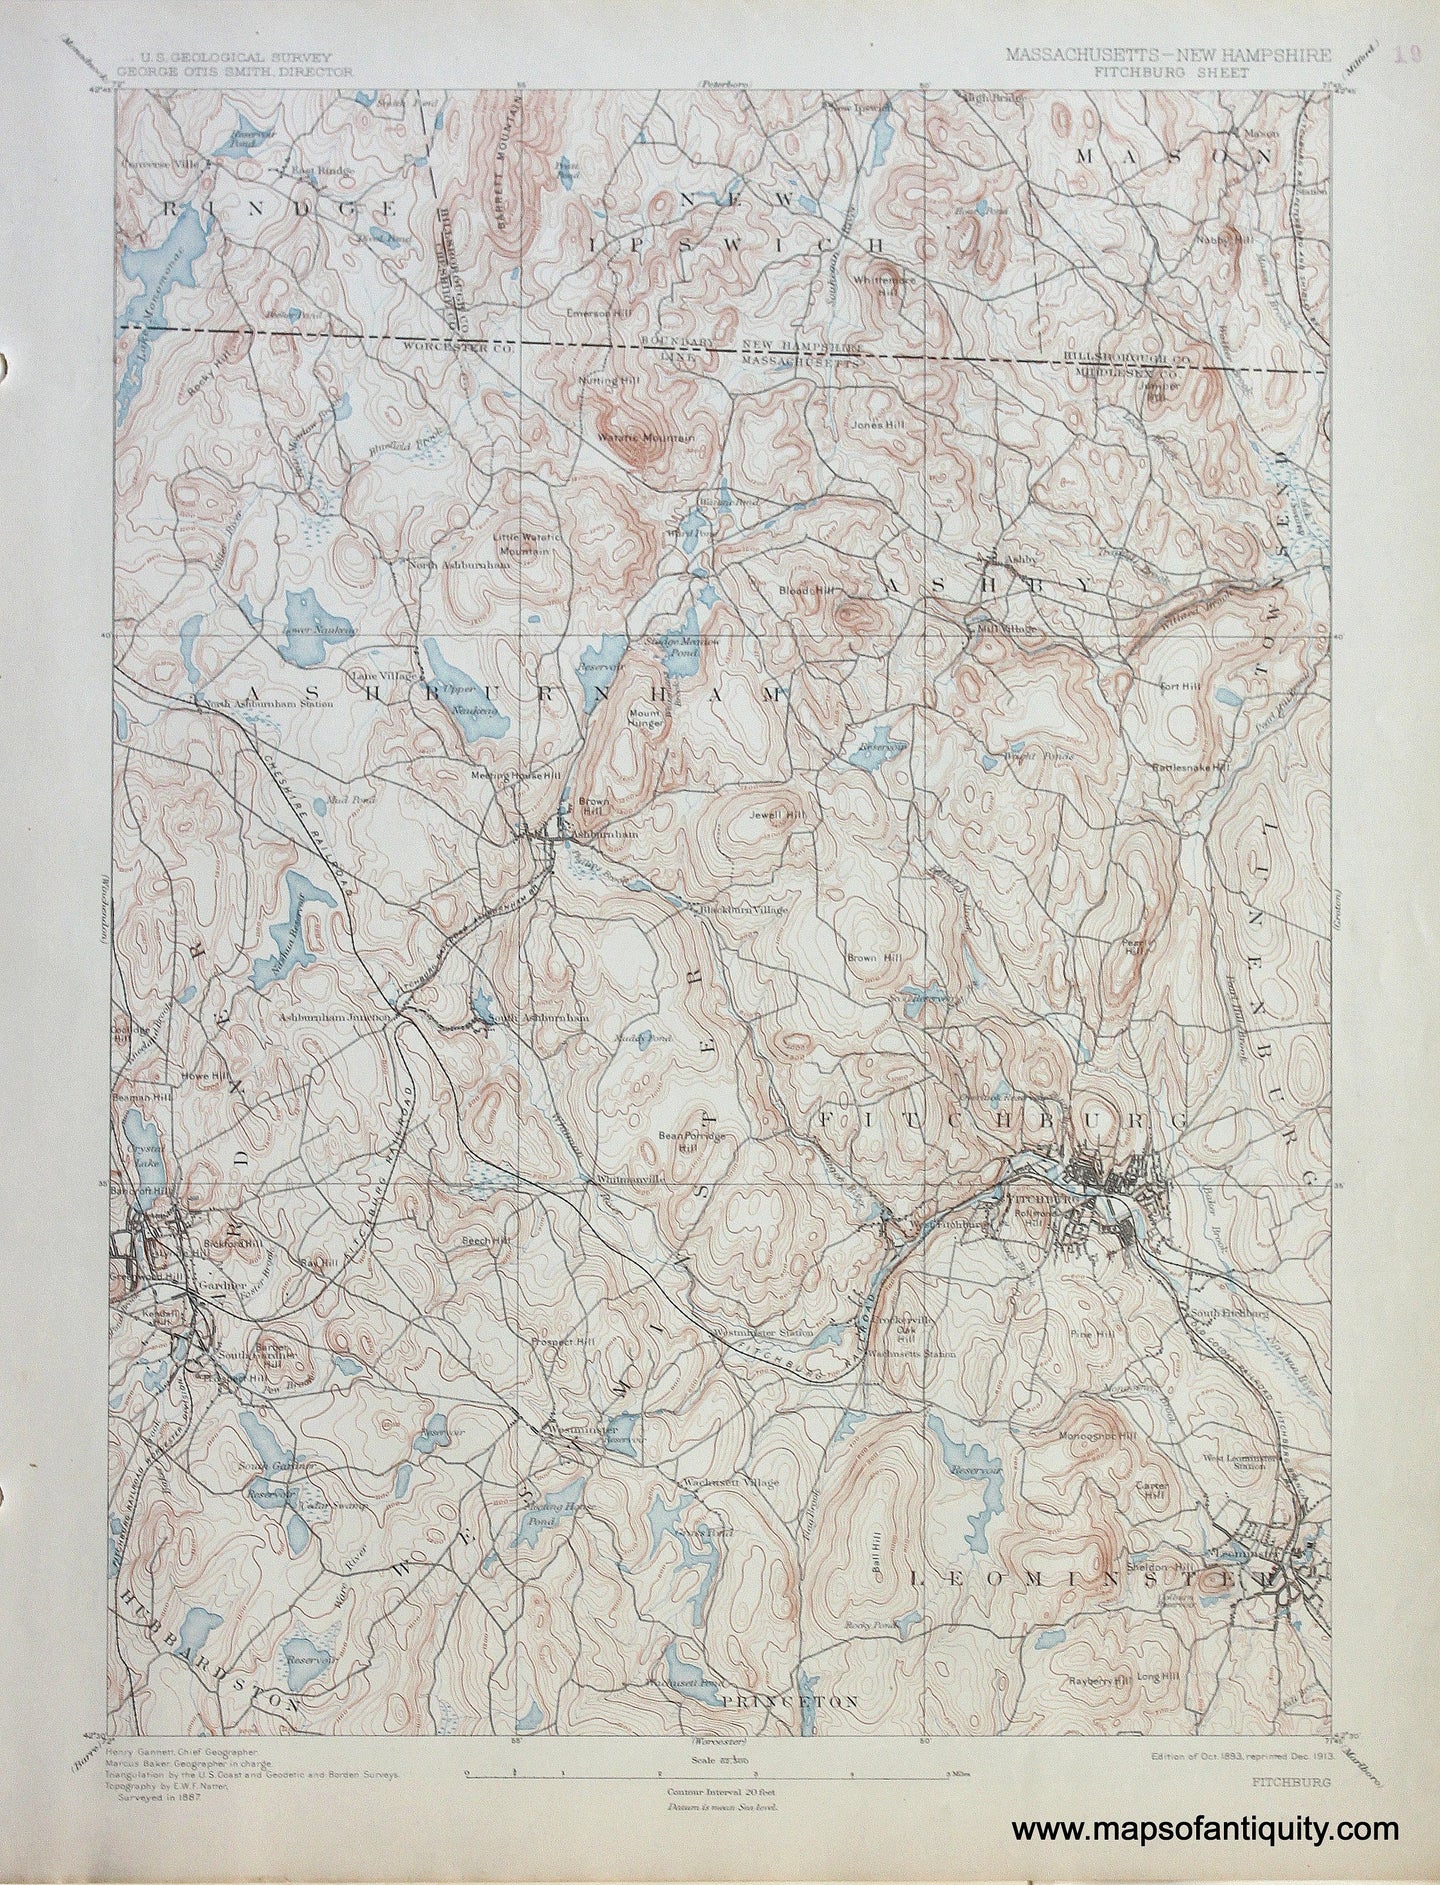 Genuine-Antique-Map-Fitchburg-Massachusetts-New-Hampshire--1913-US-Geological-Survey--Maps-Of-Antiquity